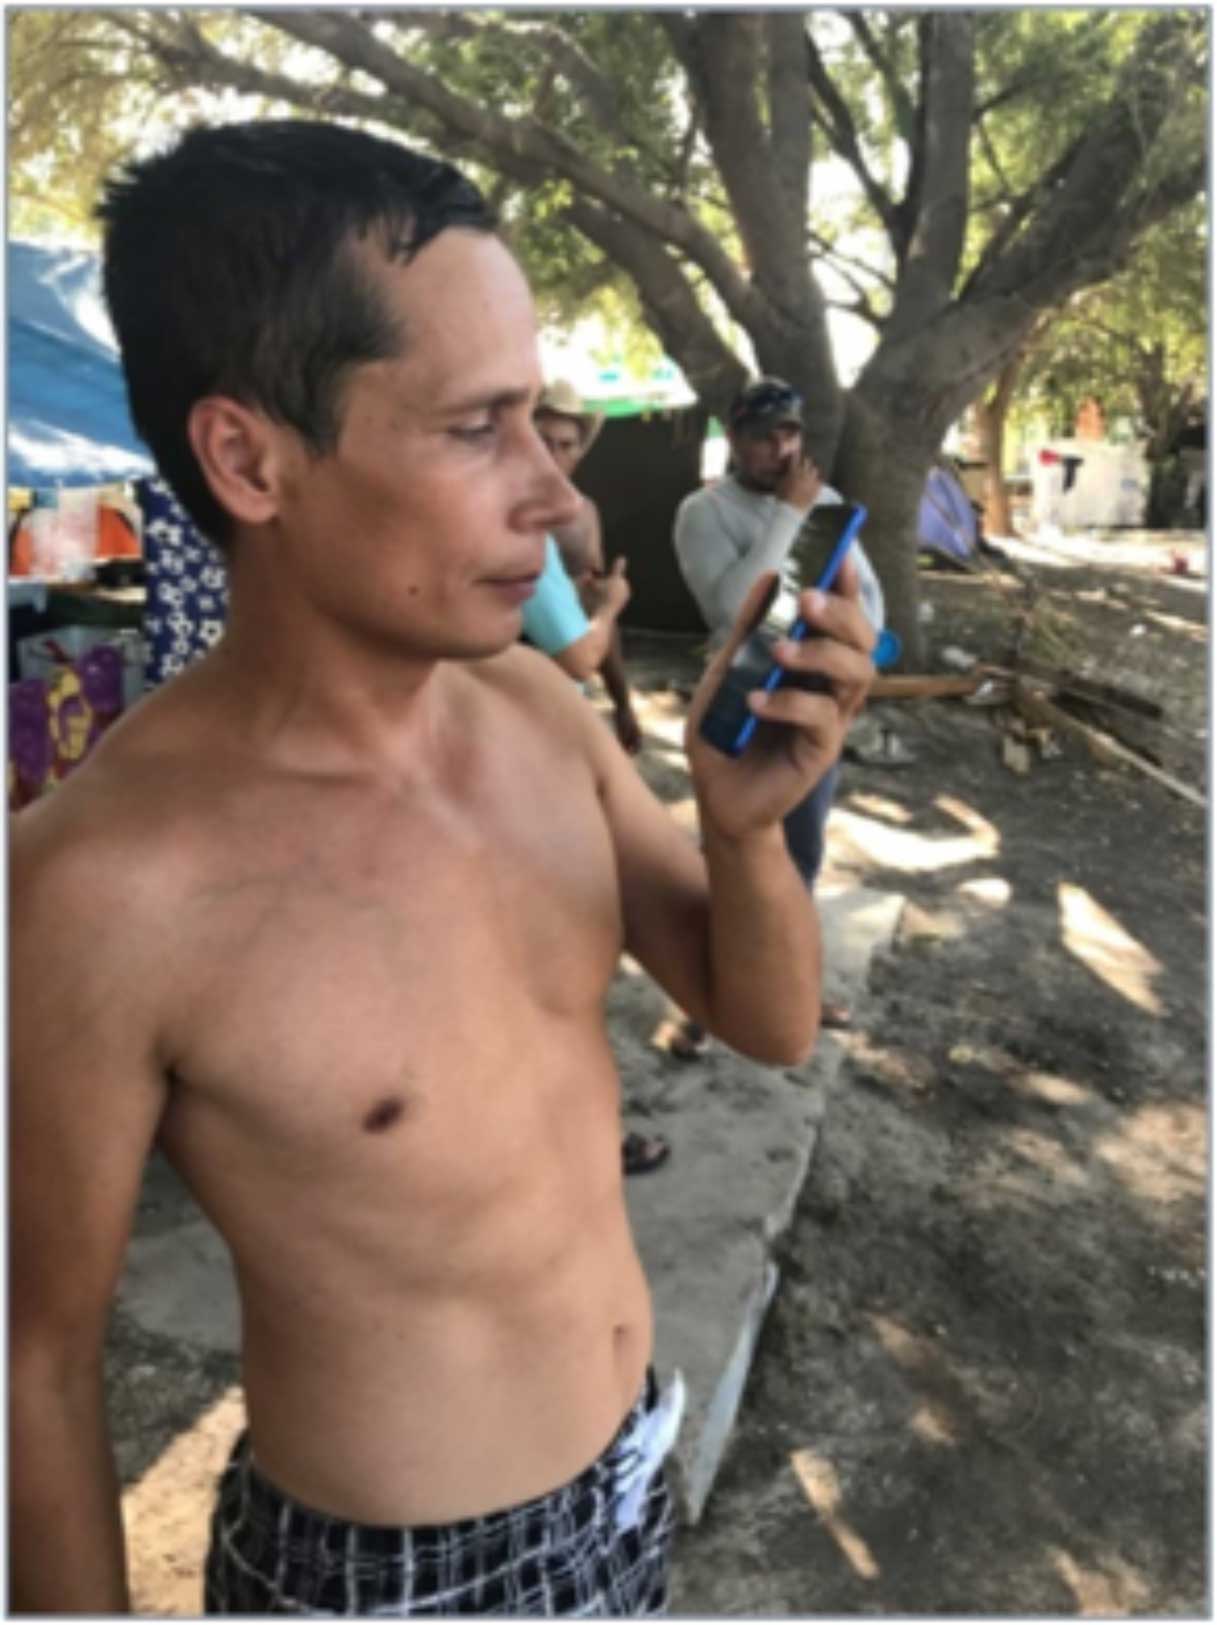 a Russian immigrant interviewed in Mexico who planned to claim U.S. asylum and spoke of having unspecified problems with Russian law enforcement back home